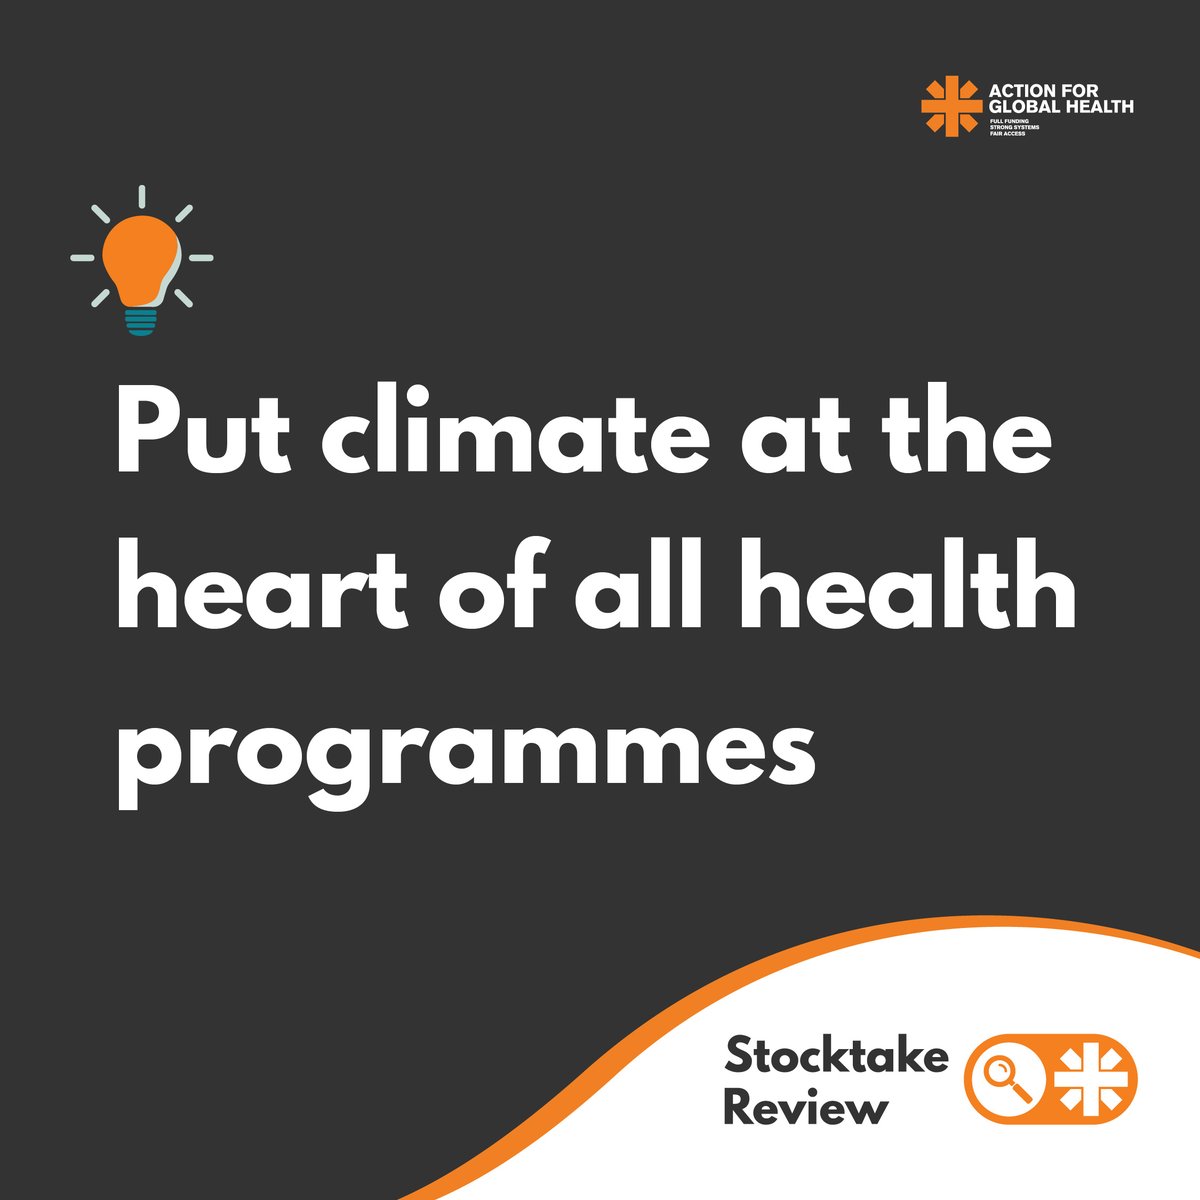 Climate change is the most important health threat of the century. We’re proud to contribute to @AFGHnetwork’s #StocktakeReview which outlines how the UK government should address this threat and achieve global health equity. Read more here: bit.ly/4dxed1u